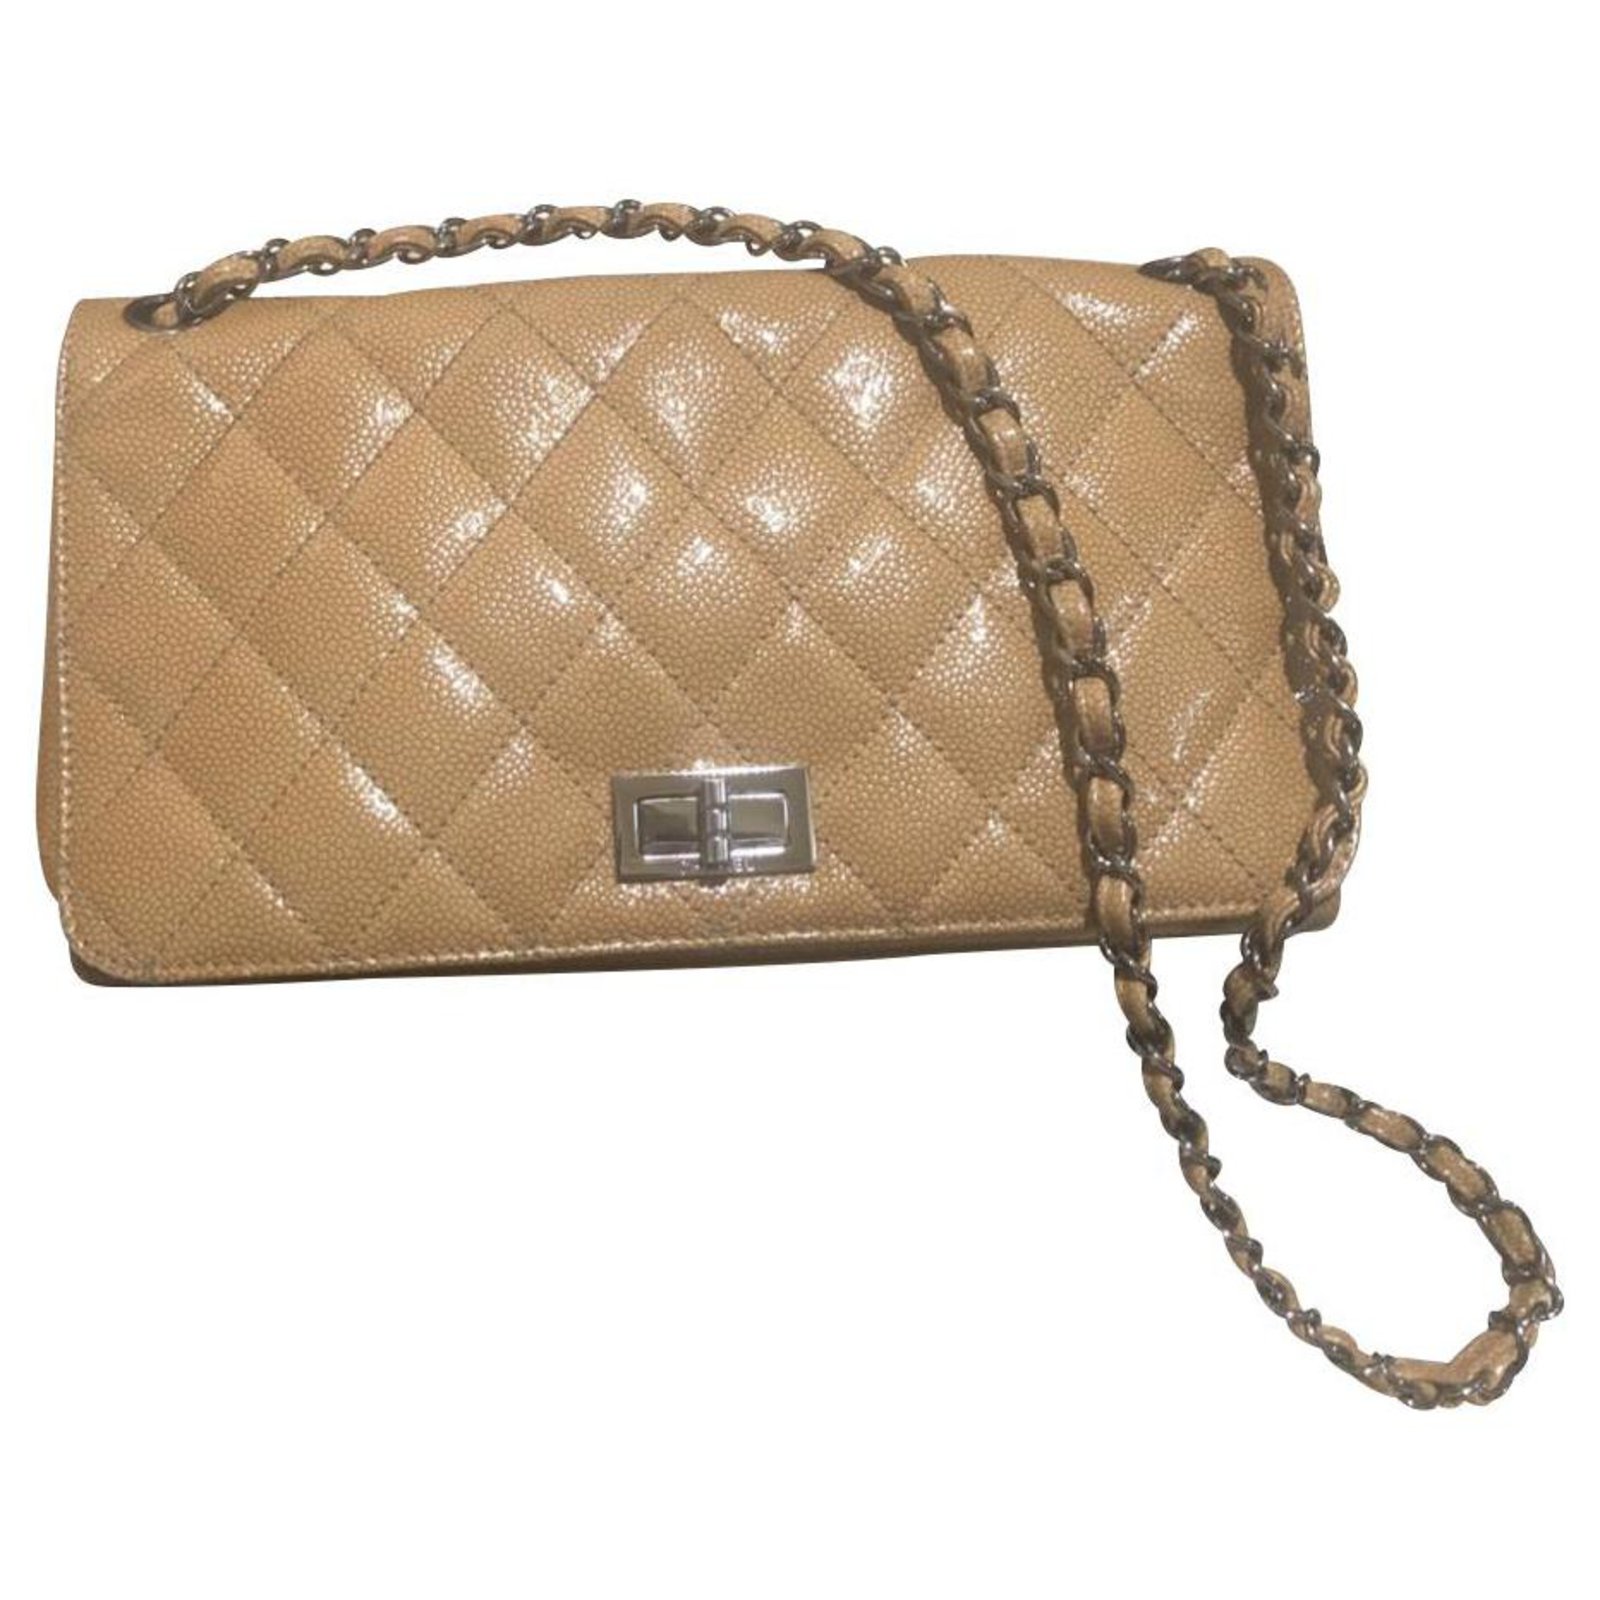 2.55 patent leather crossbody bag Chanel Beige in Patent leather